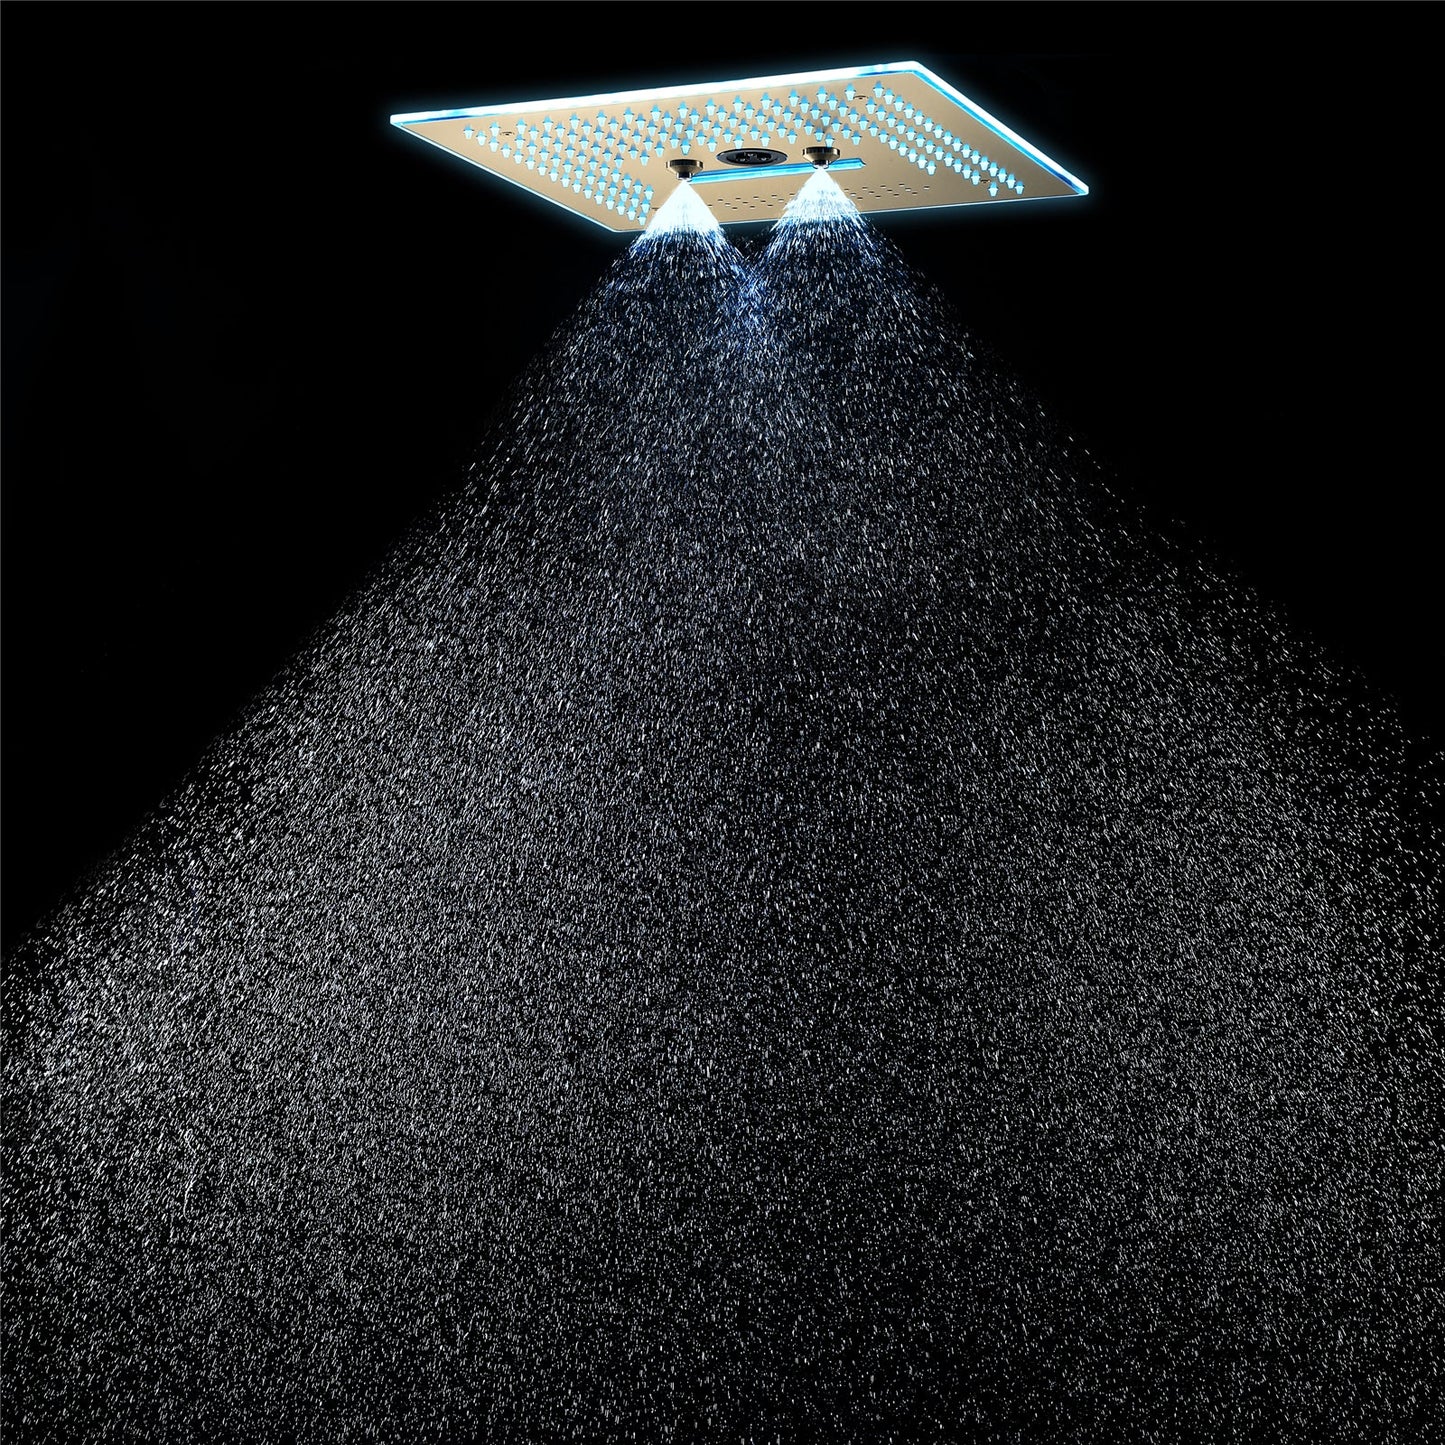 16-Inch Brushed Gold Flush-Mounted Rainfall, Waterfall, Mist, Hydro-Massage Shower Head with 64 LED Lights and Bluetooth Music - 5-Way Thermostatic Shower Faucet With Optional Digital Display